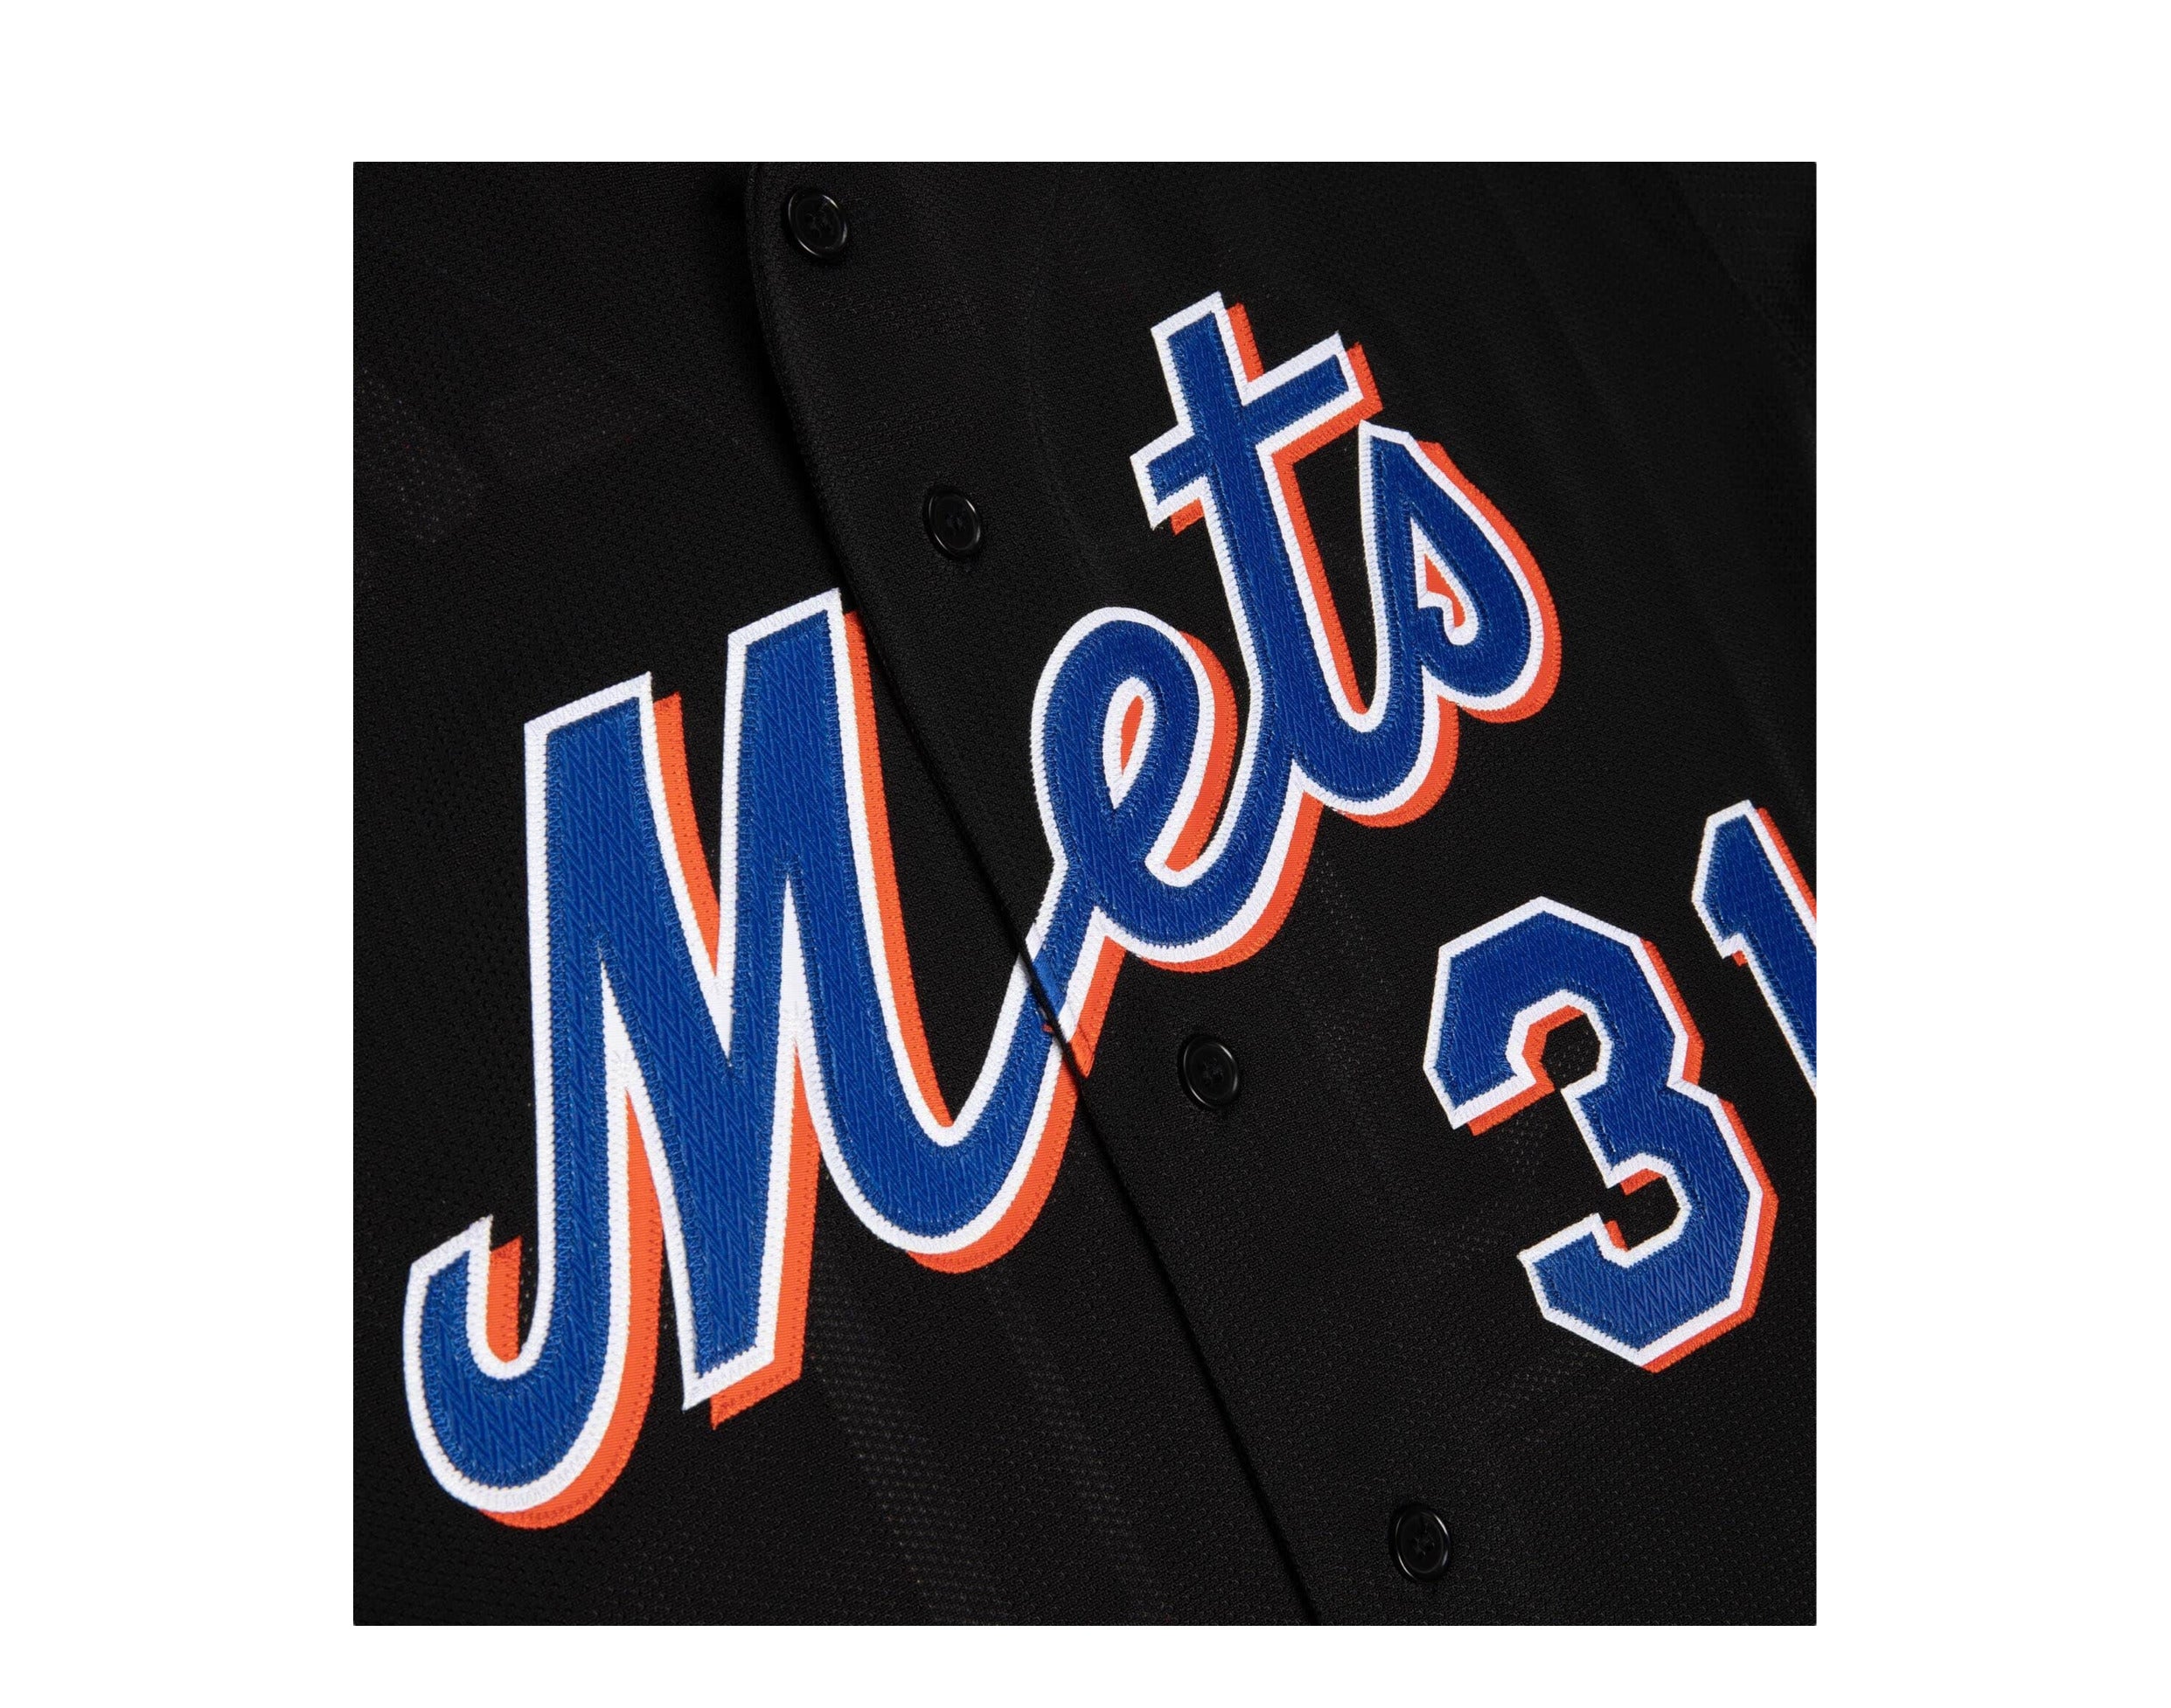 Men's New York Mets Mike Piazza Mitchell & Ness Black Cooperstown  Collection Mesh Batting Practice Button-Up Jersey